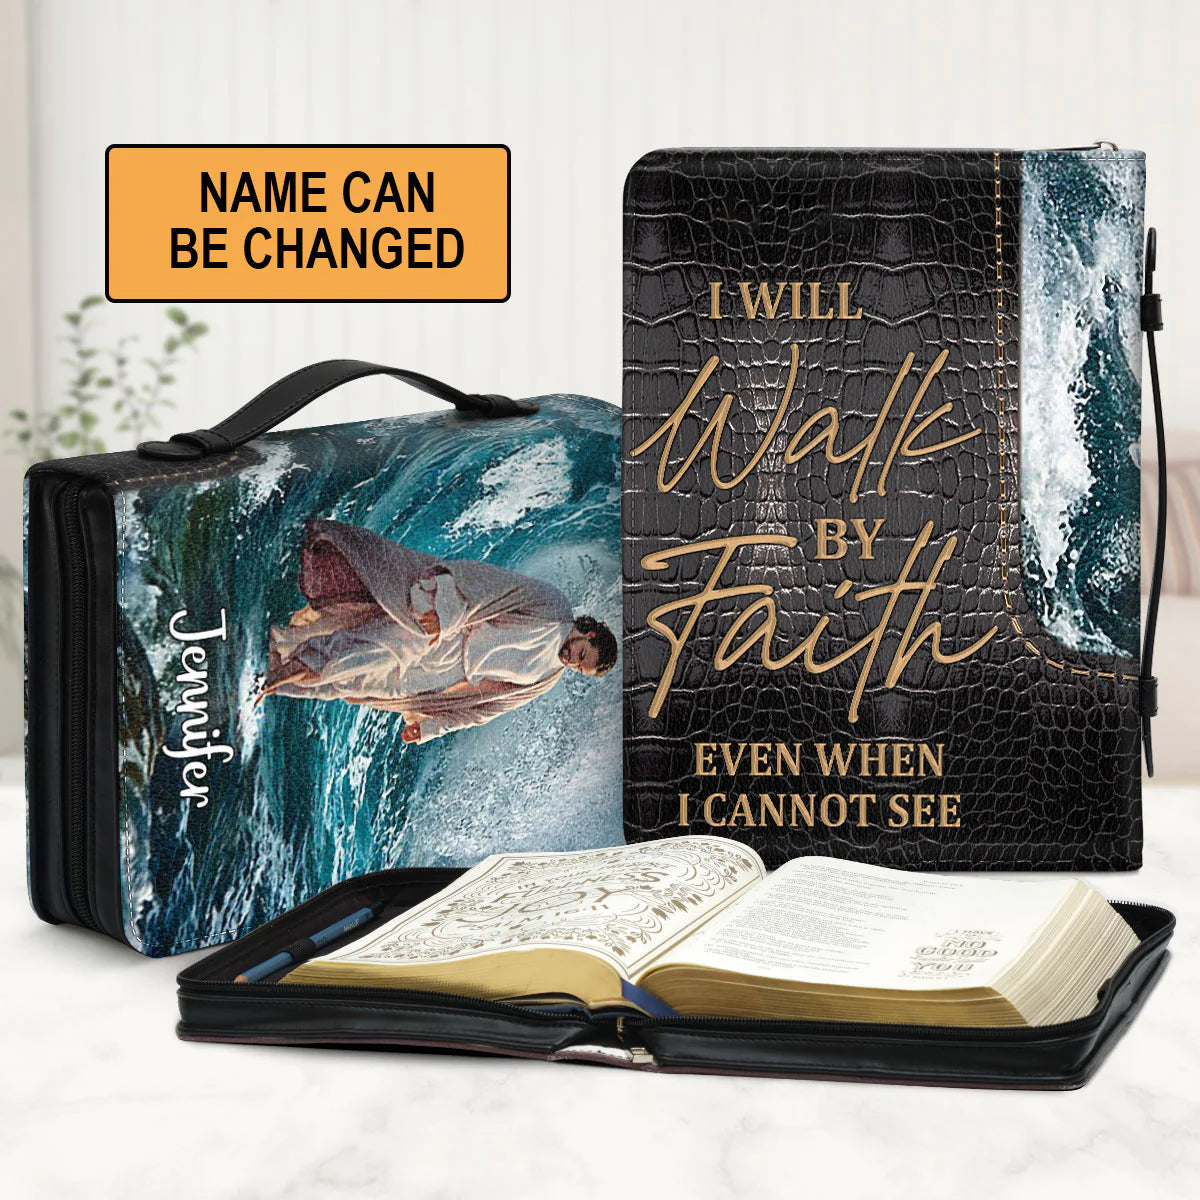 Christianart Bible Cover, I Will Walk By Faith Even I Cannot See